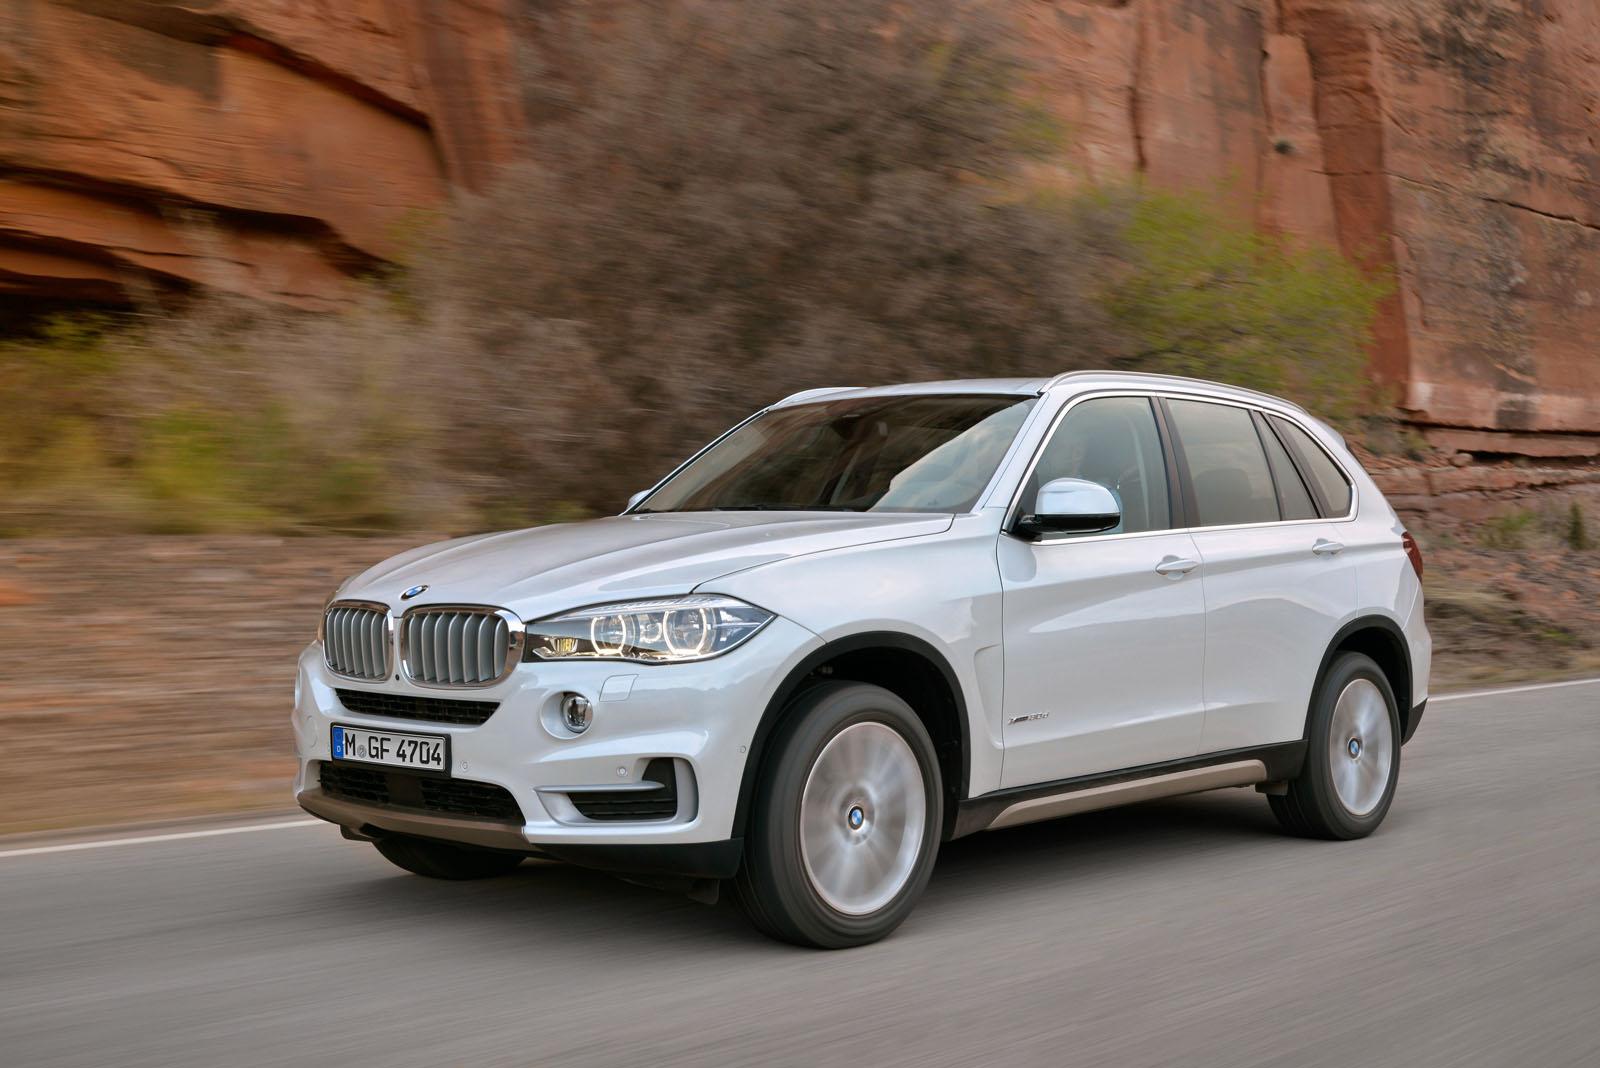 Upcoming BMW X5 Reportedly Coming in Early 2017